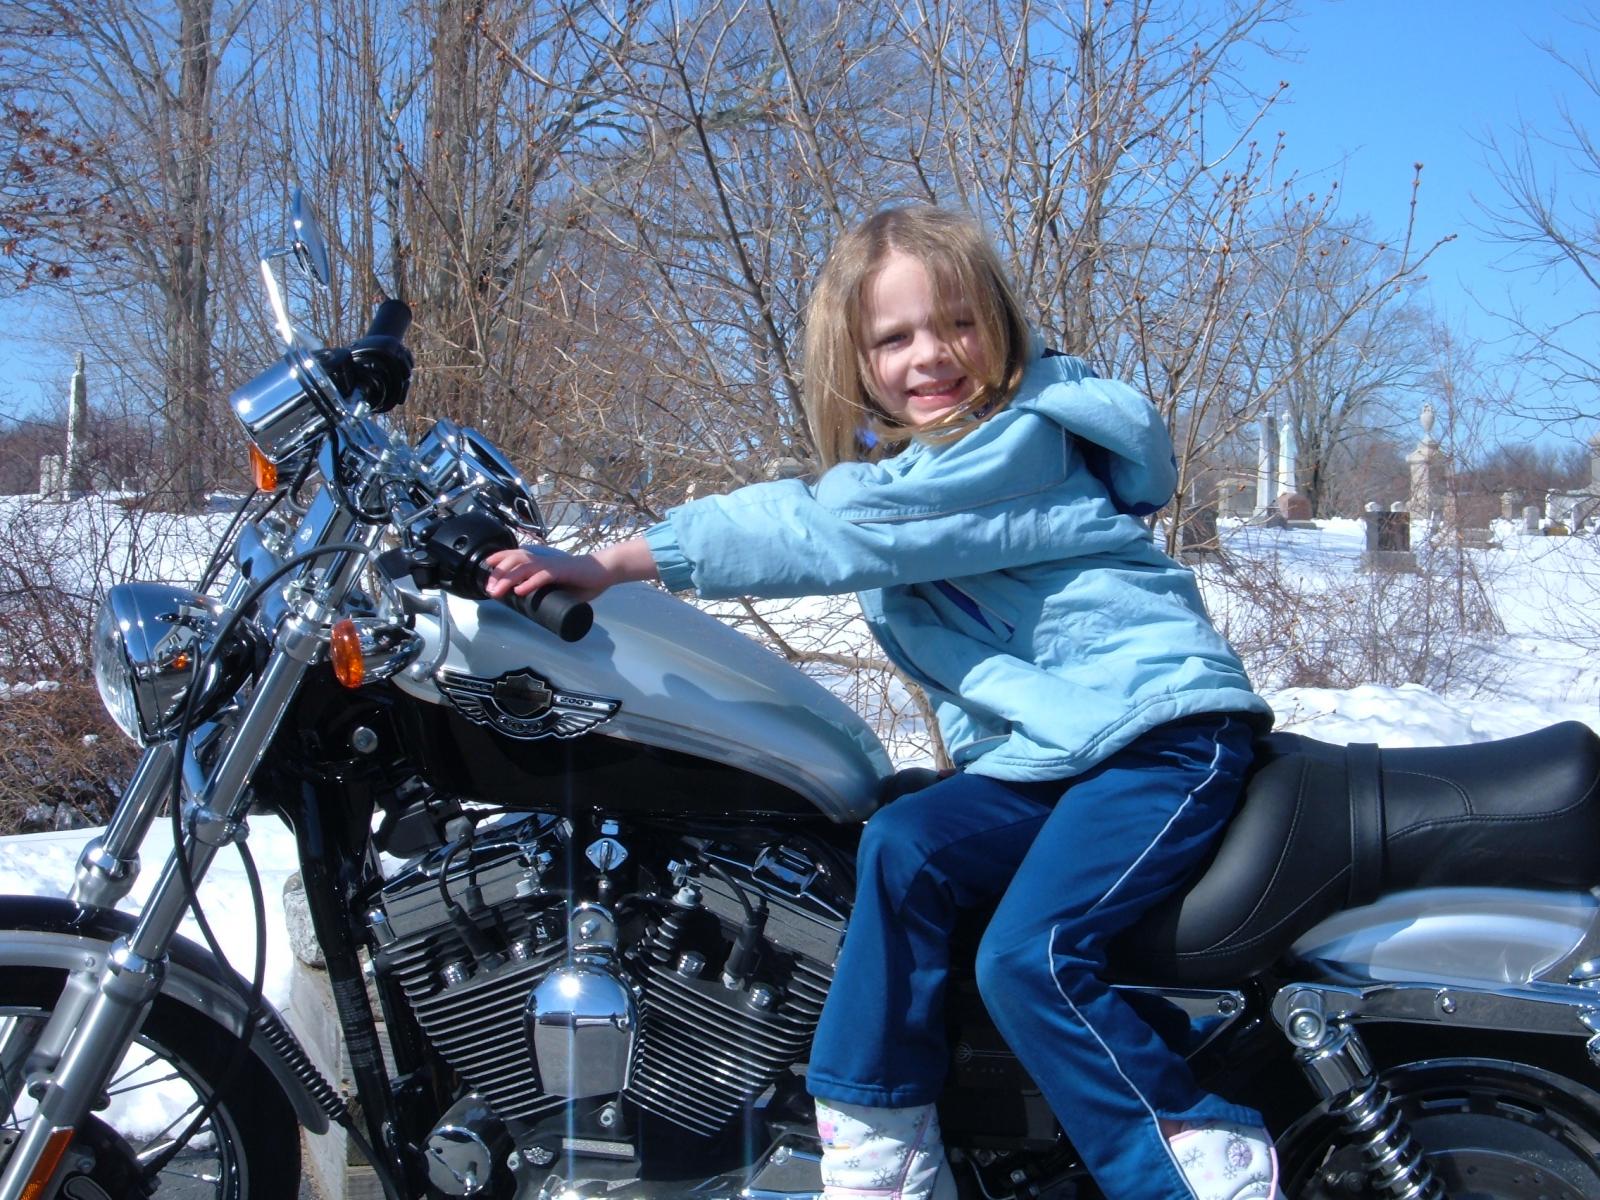 Daughter on my old ride